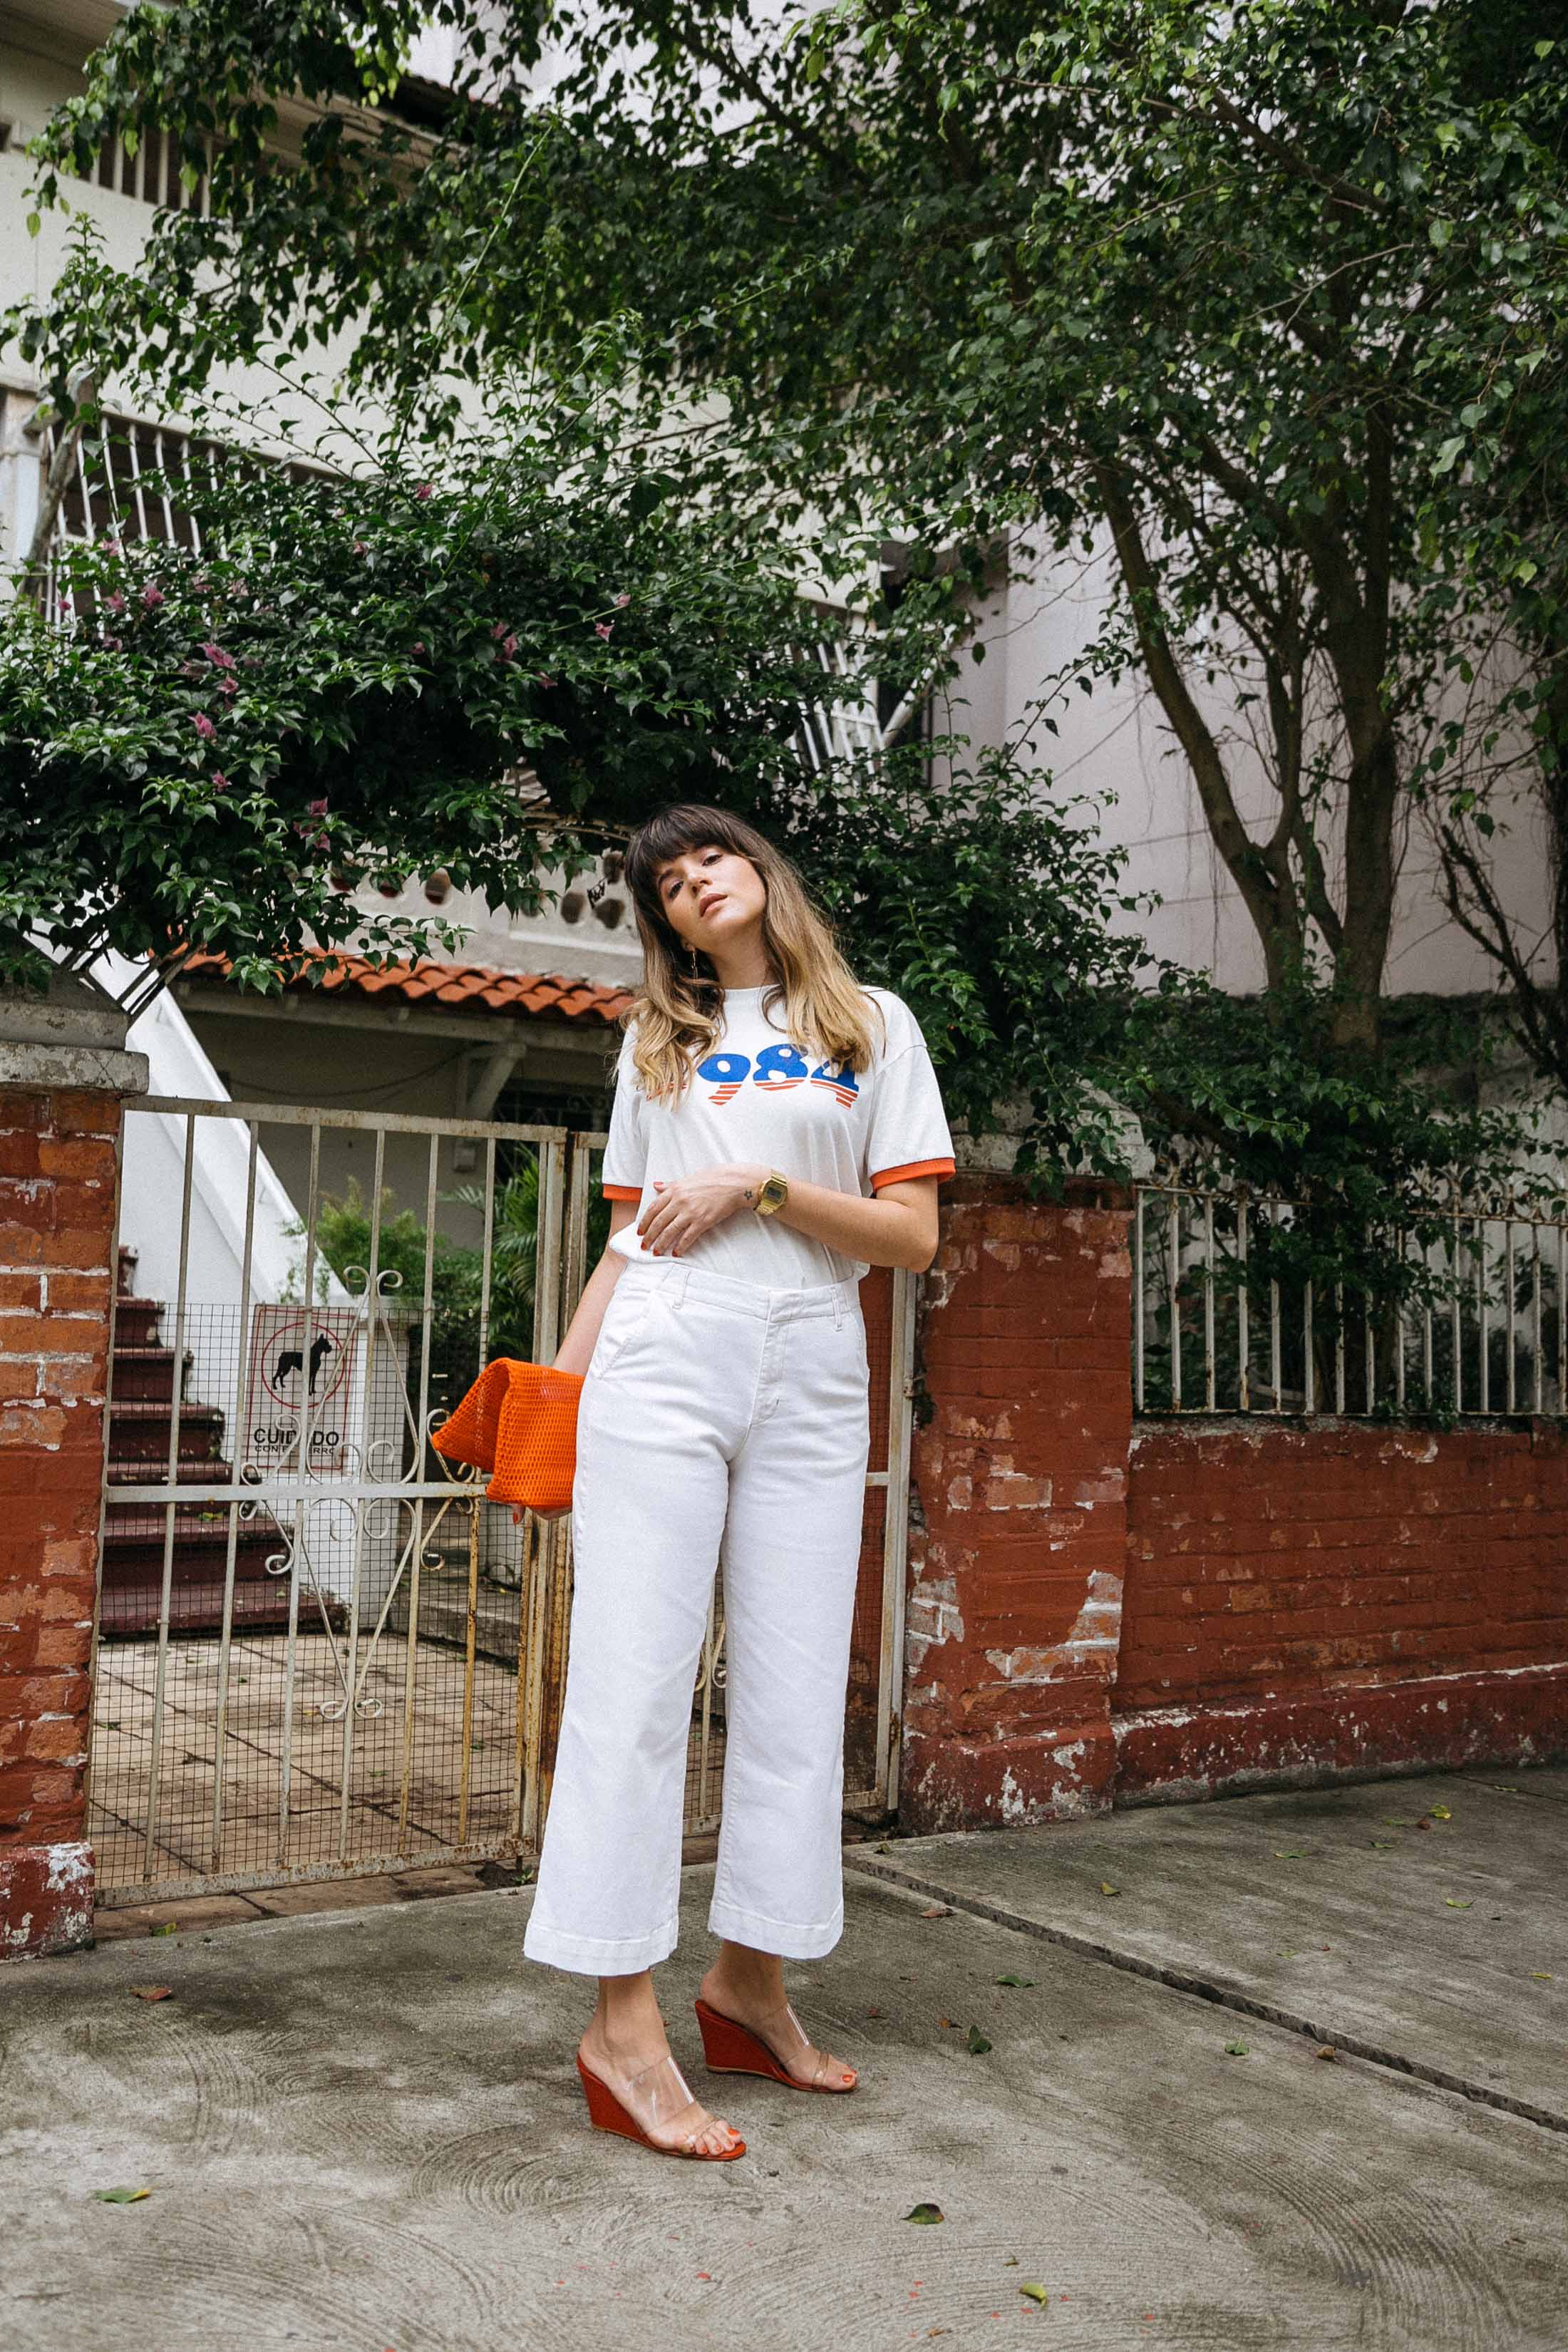 Maristella wears a nostalgic ringer tee with wide leg cropped jeans and wedge shoes